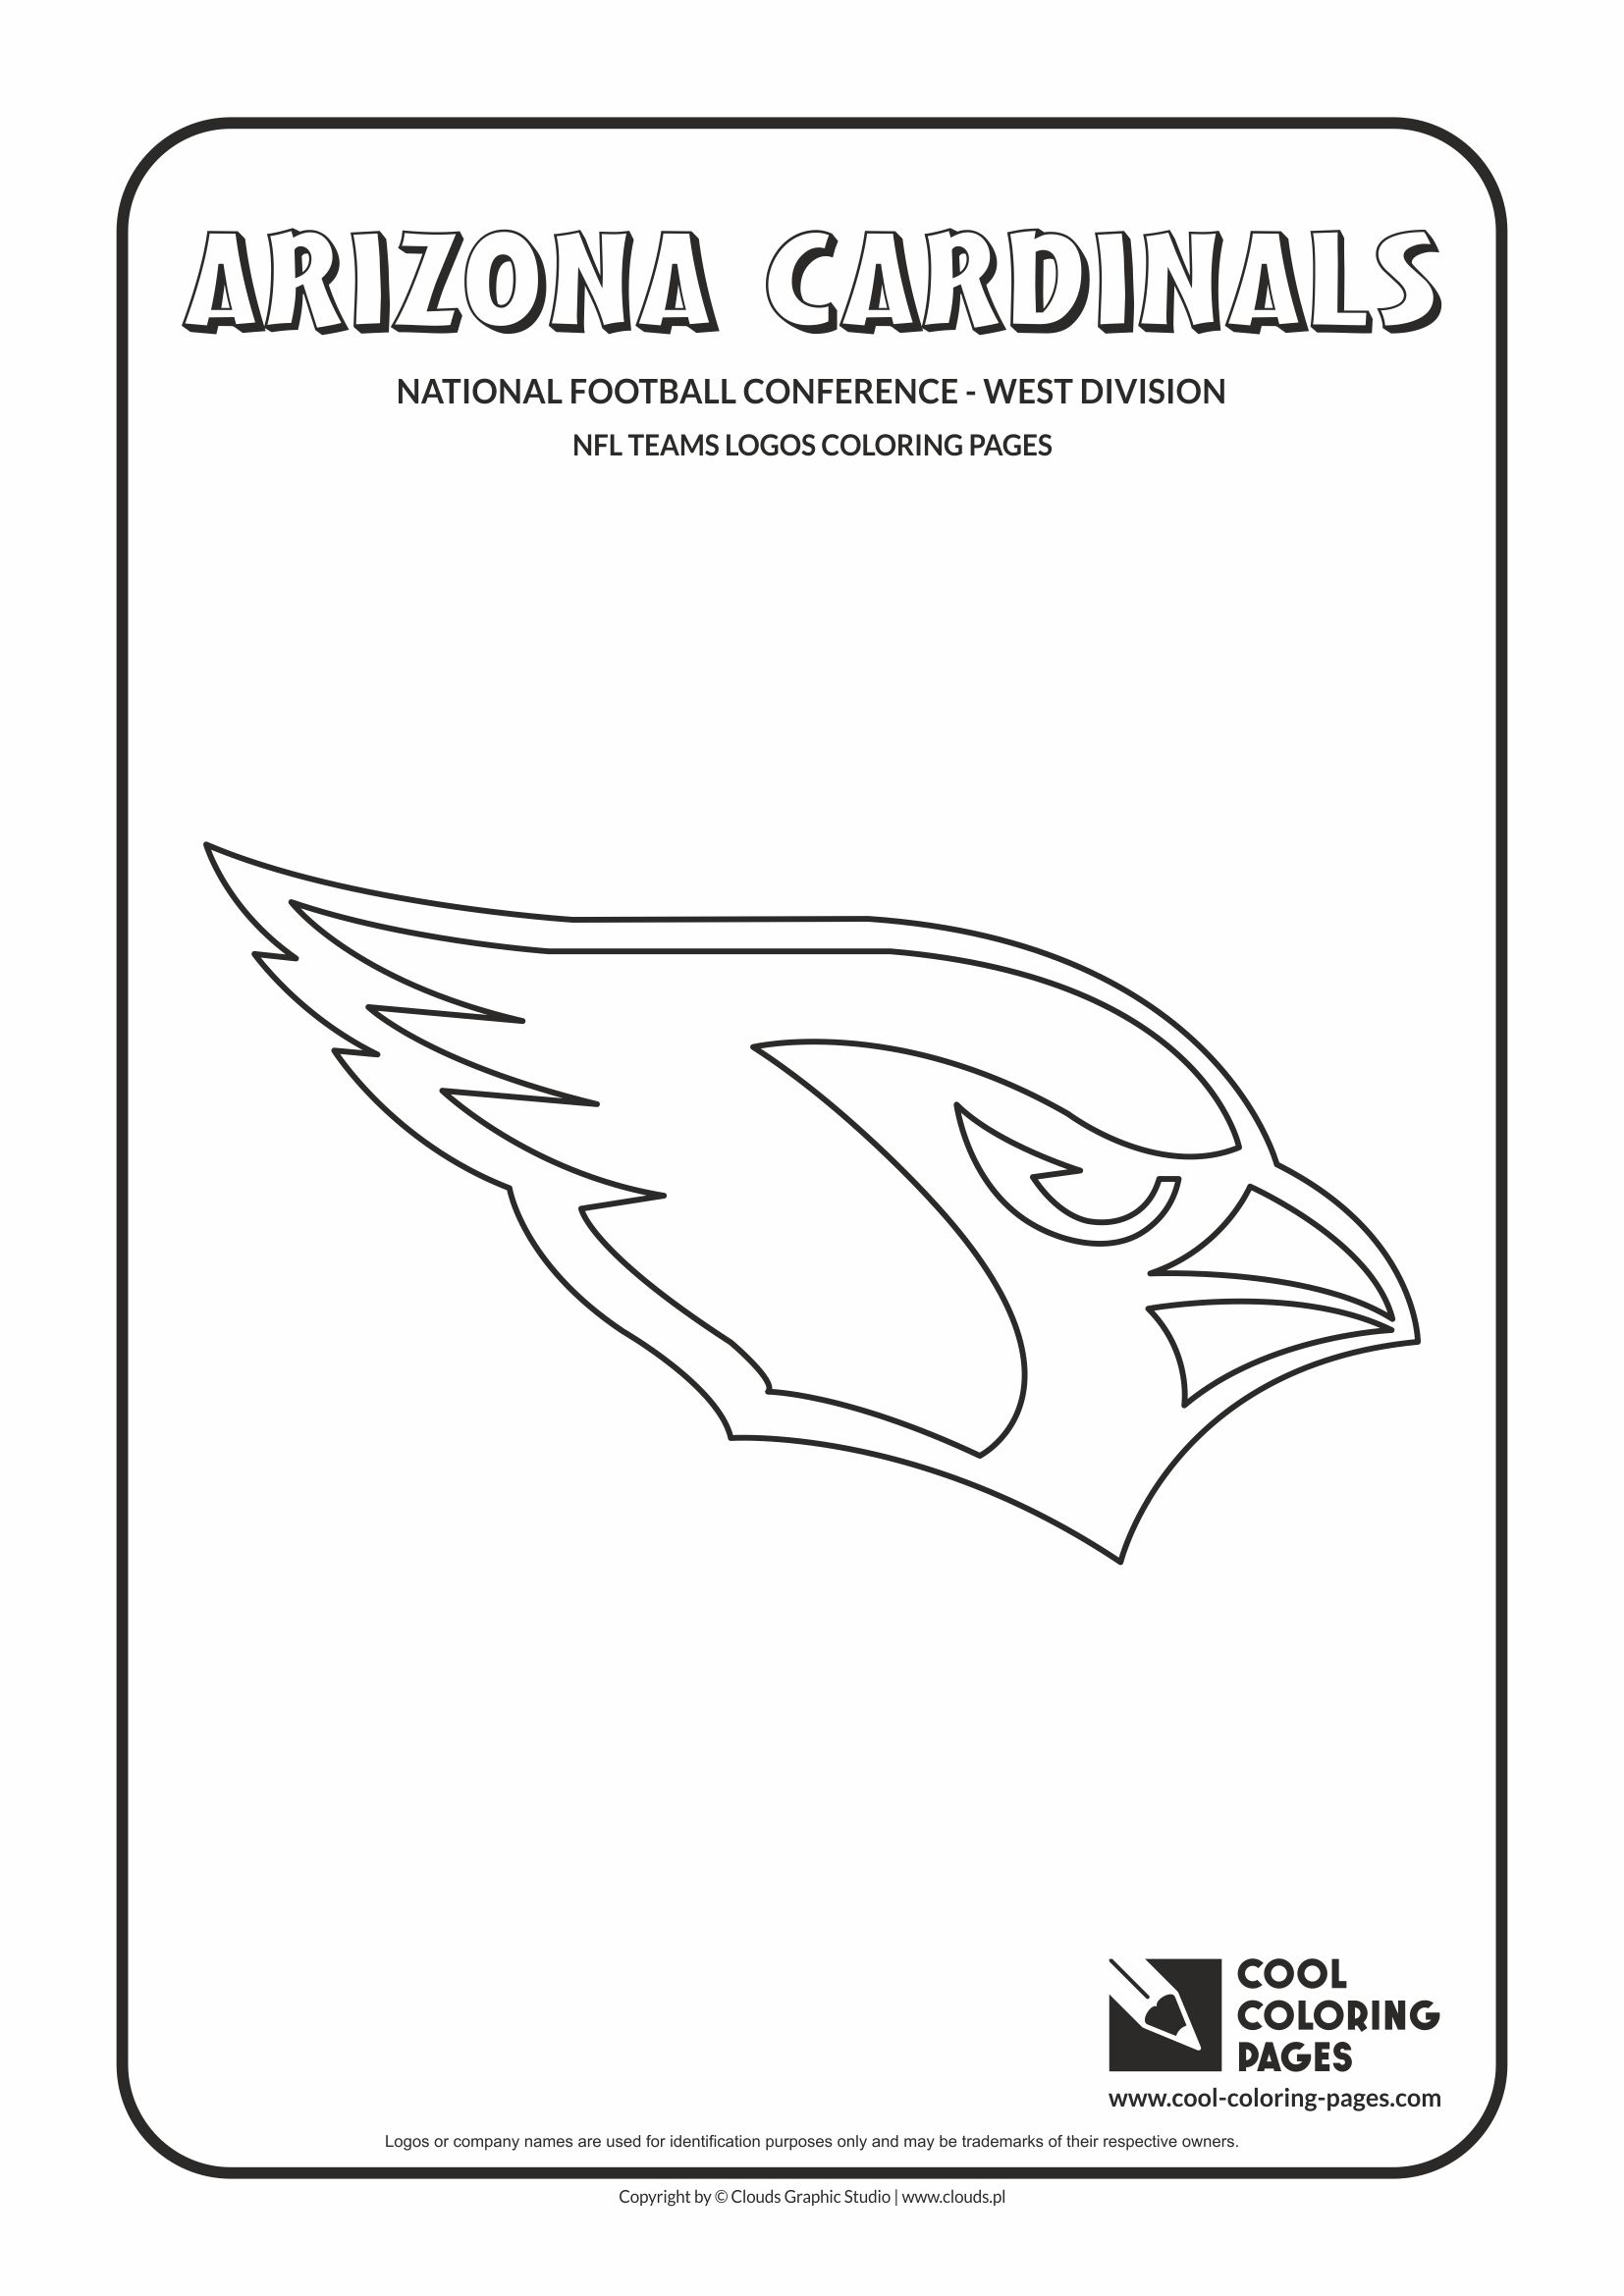 Cool Coloring Pages NFL teams logos coloring pages - Cool Coloring Pages